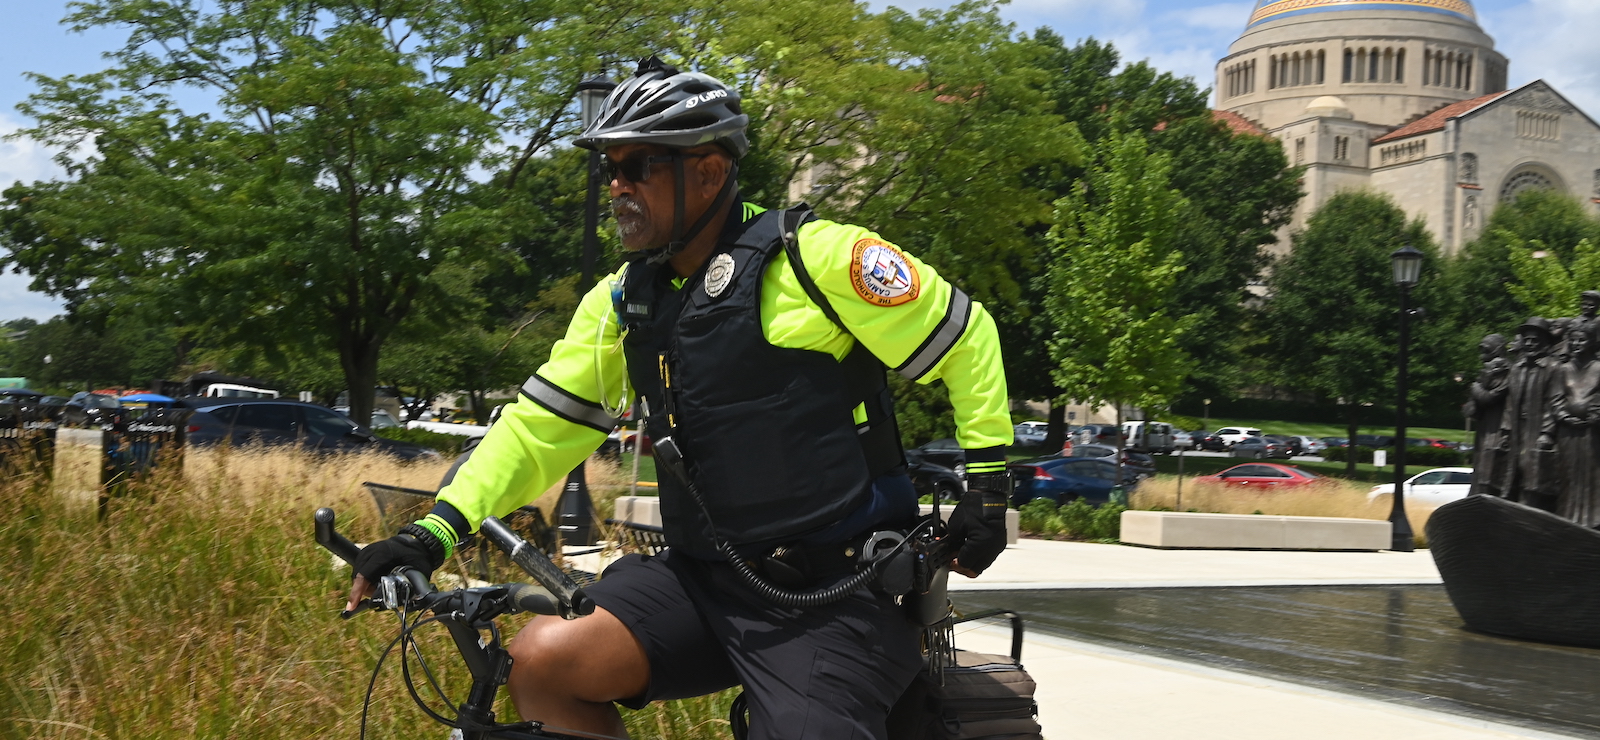 Public Safety officer patrolling campus by bike